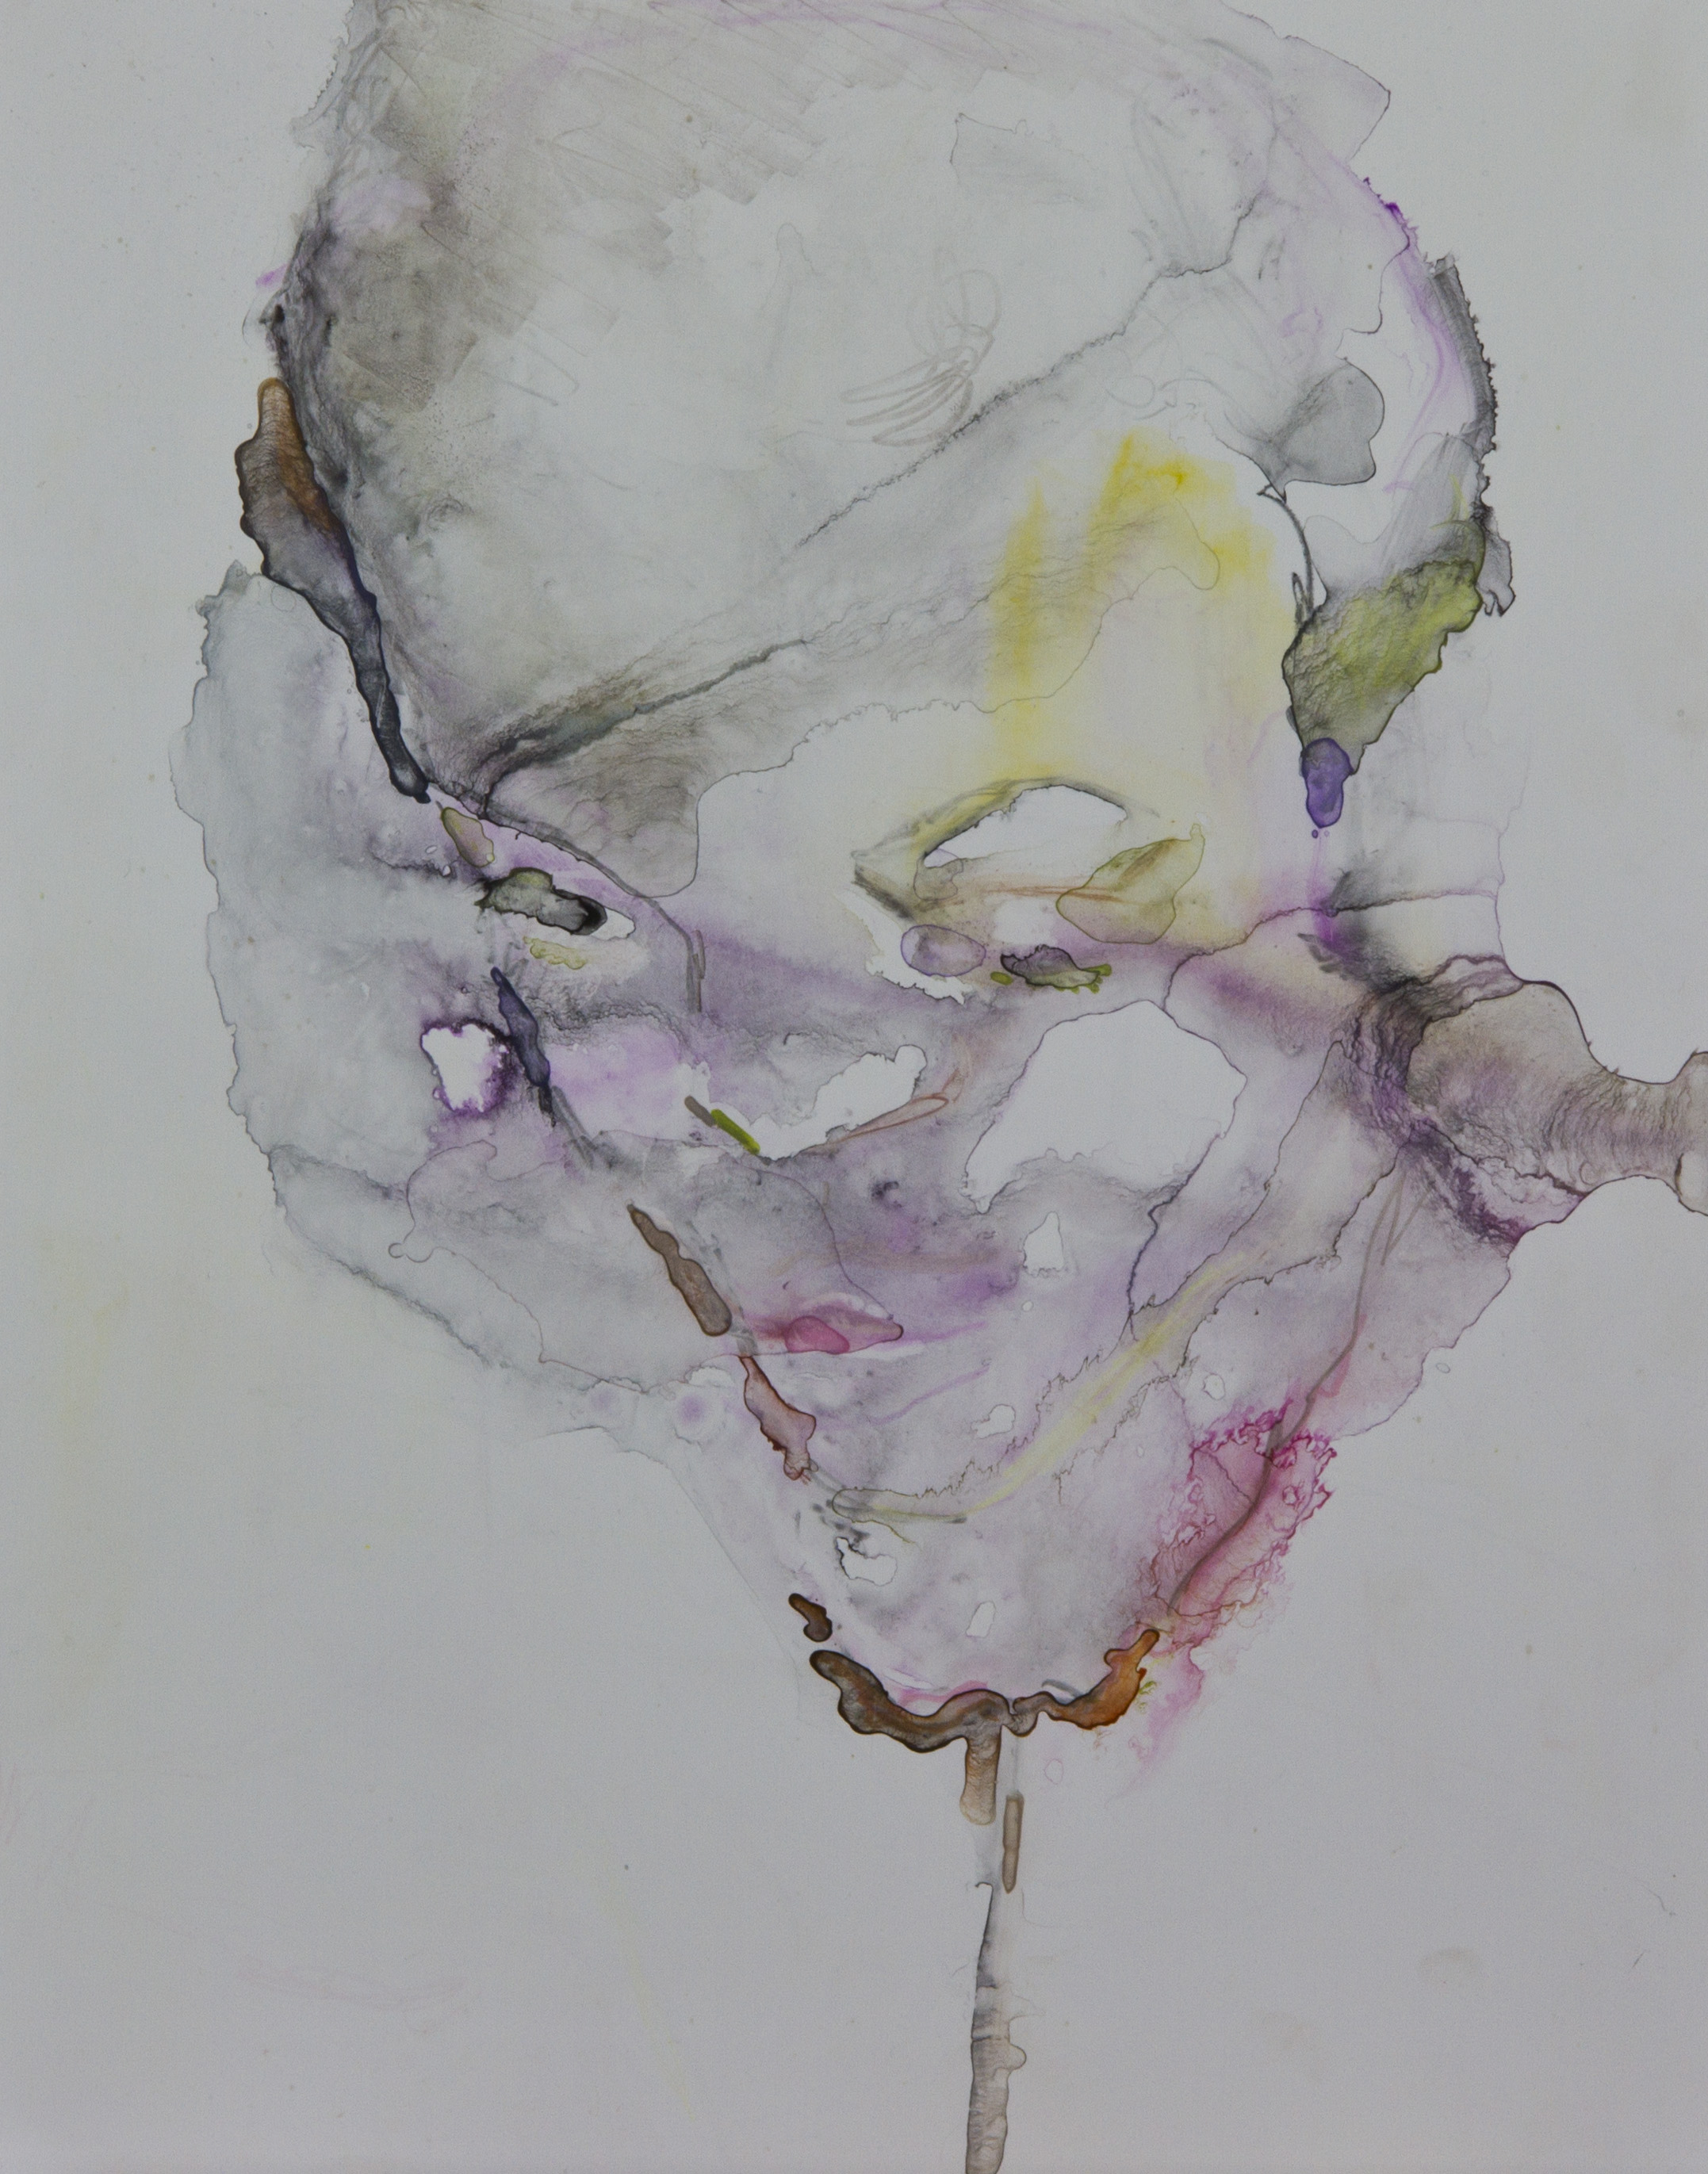 Specimen 7, 2011, watercolor on polypropylene, 11x14 inches